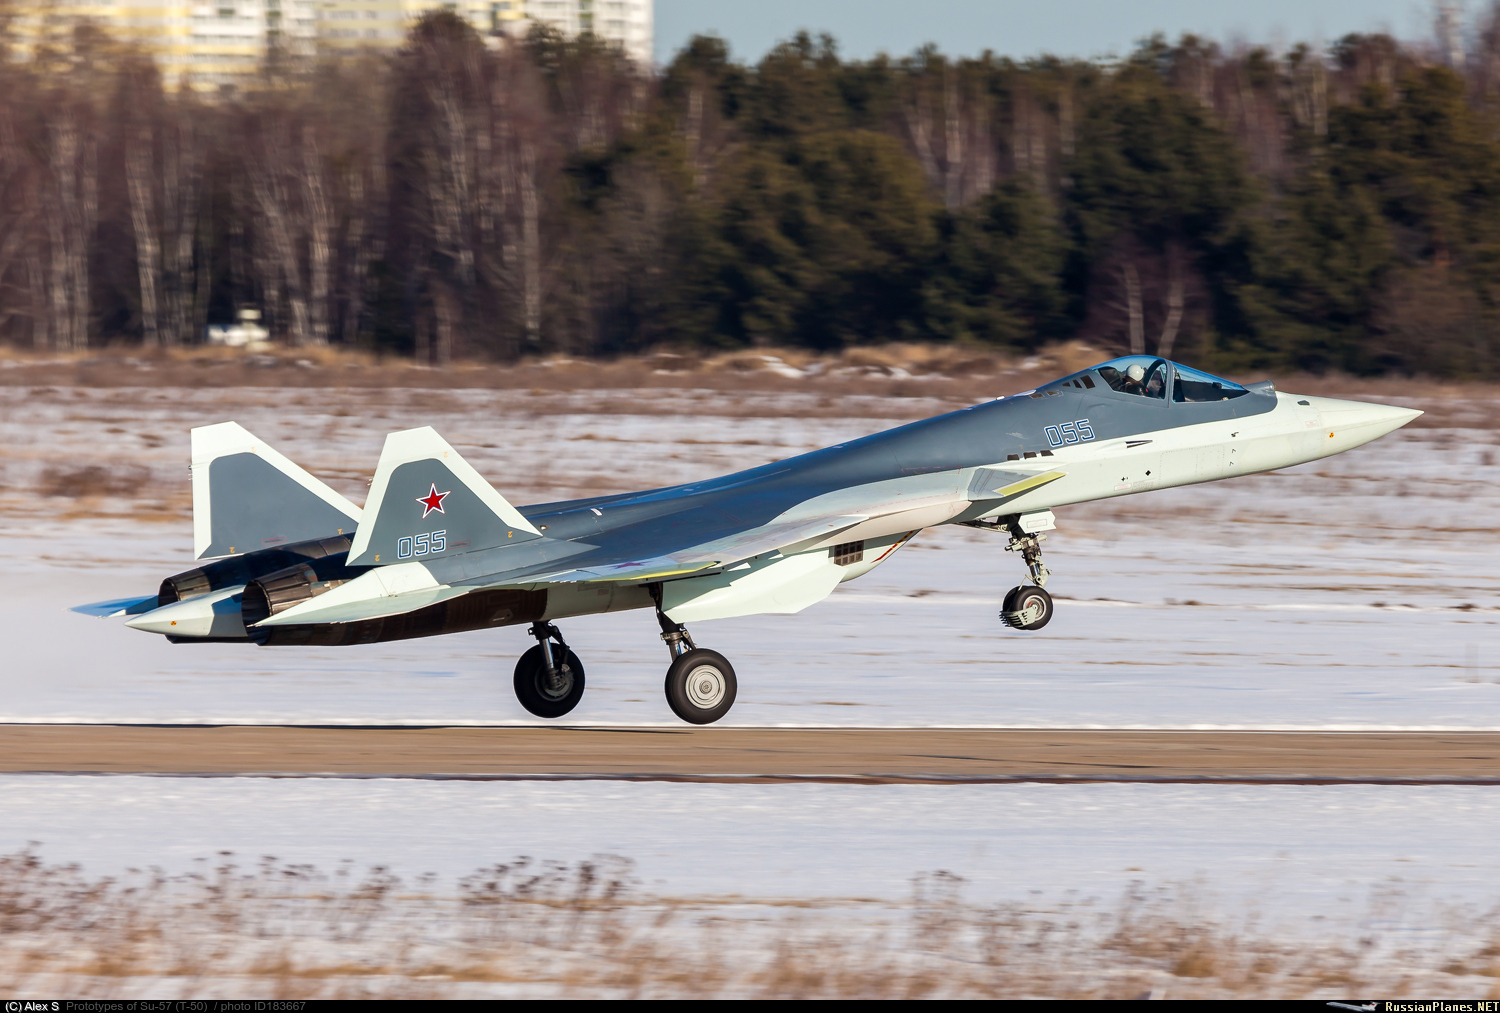 http://russianplanes.net/images/to184000/183667.jpg